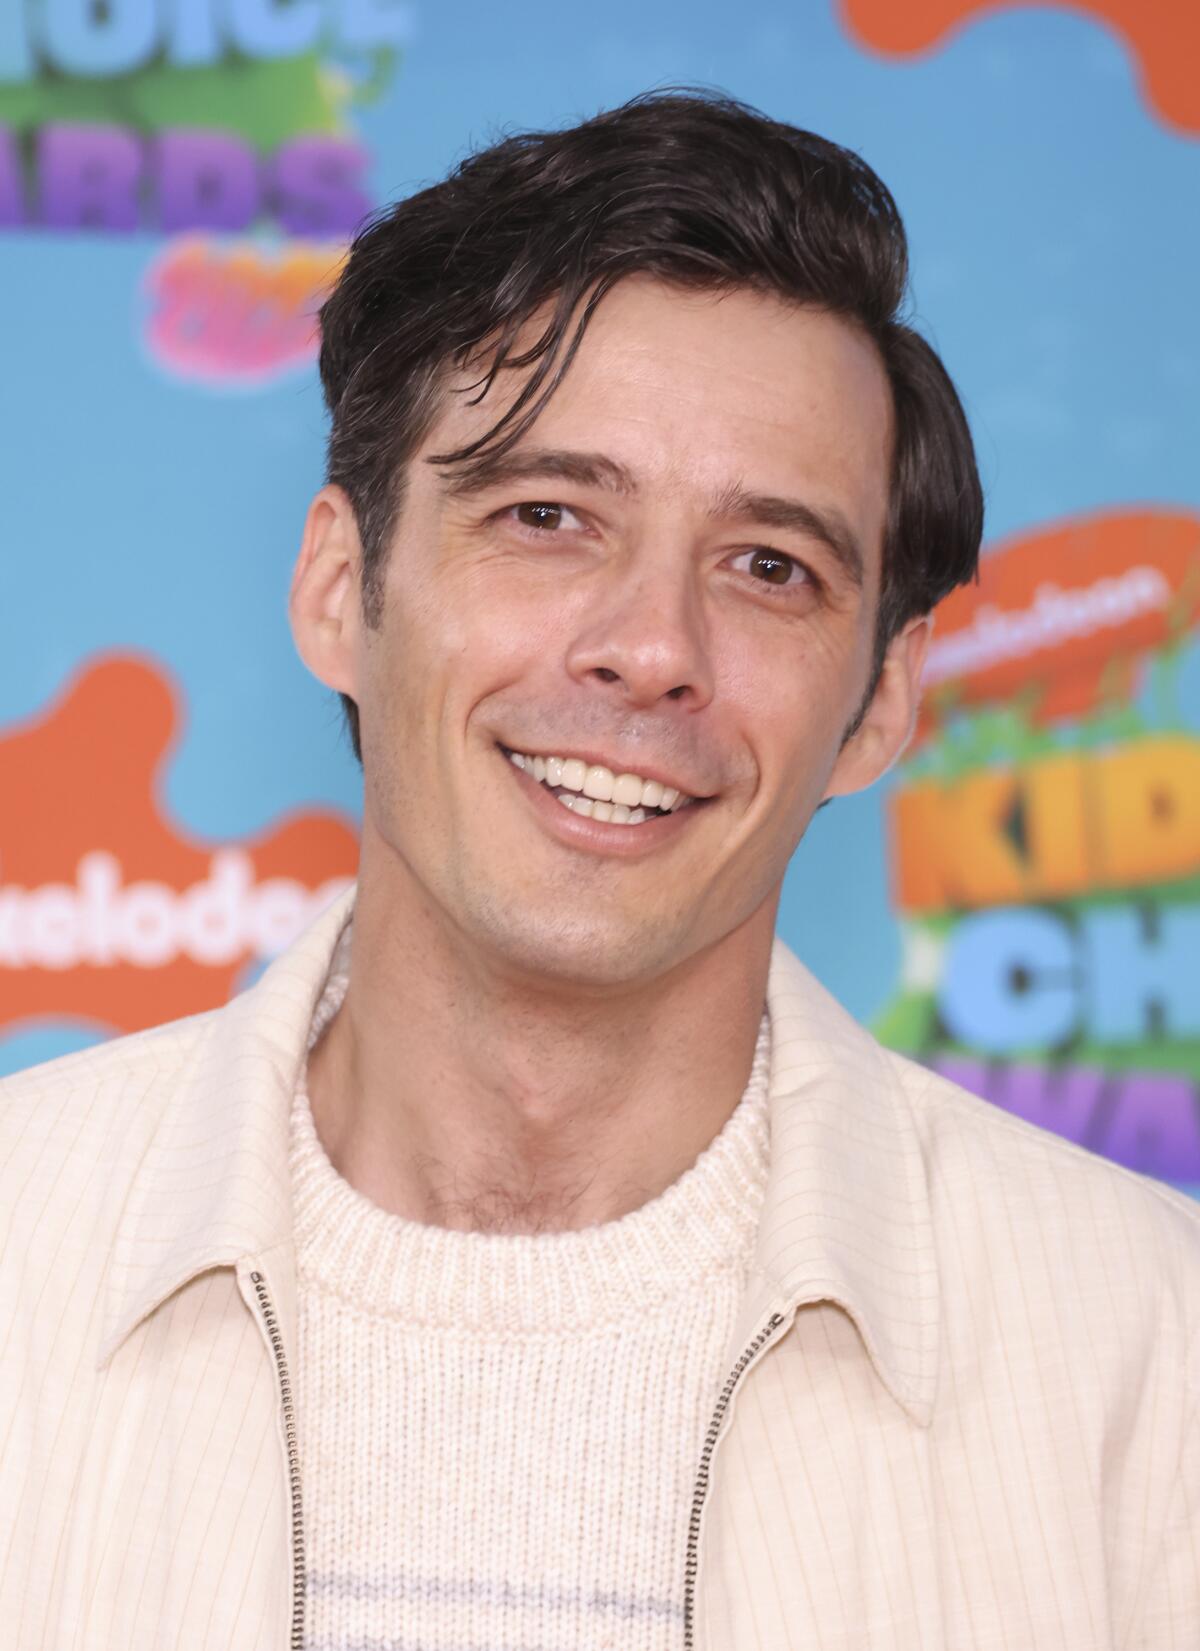 A man with short, wavy dark hair wearing a cream-colored sweater and jacket smiling against a background of many colors